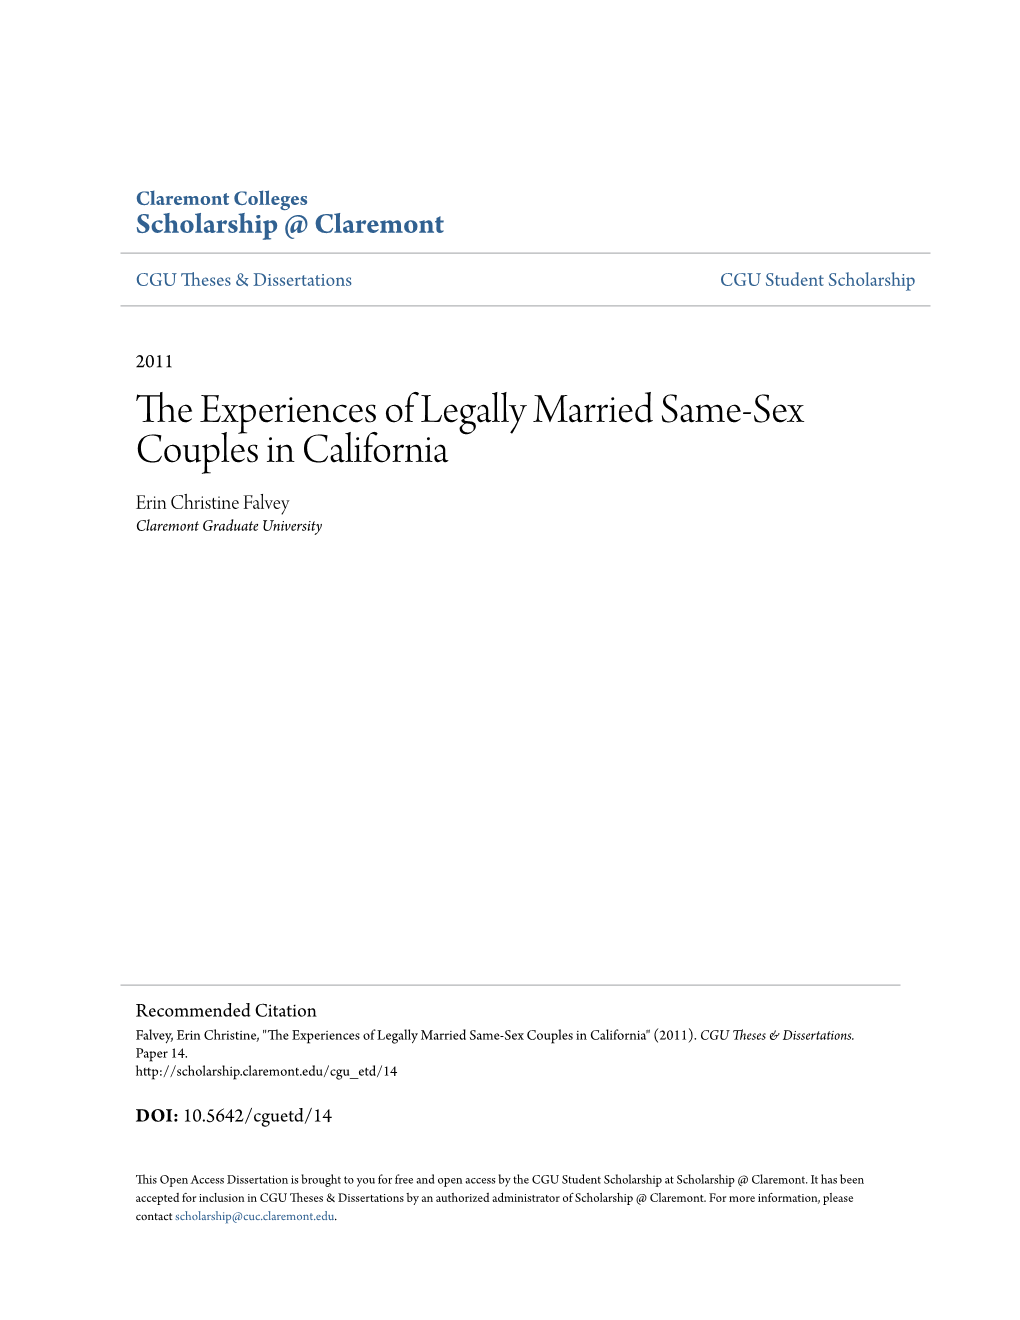 The Experiences of Legally Married Same-Sex Couples in California Erin Christine Falvey Claremont Graduate University